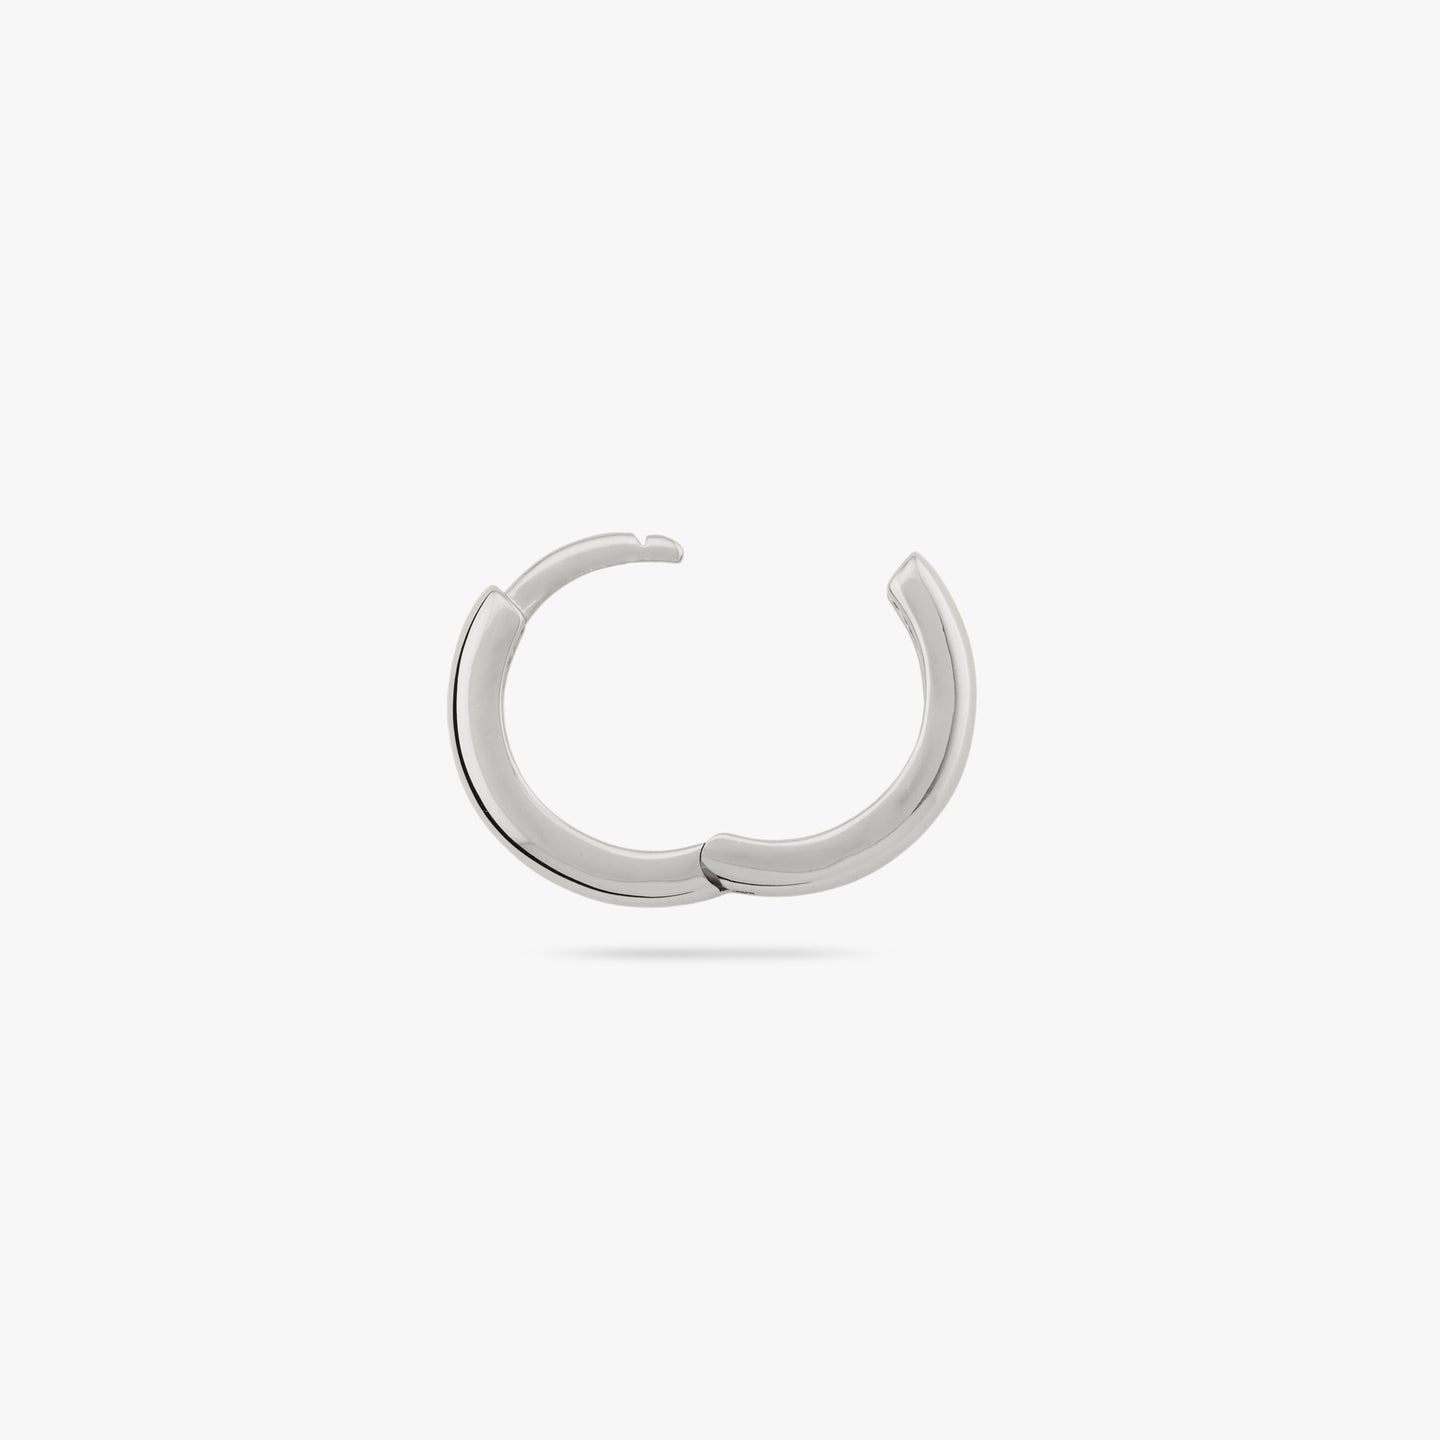 A small bulky and chunky shaped silver huggie and the clasp is undone color:null|silver